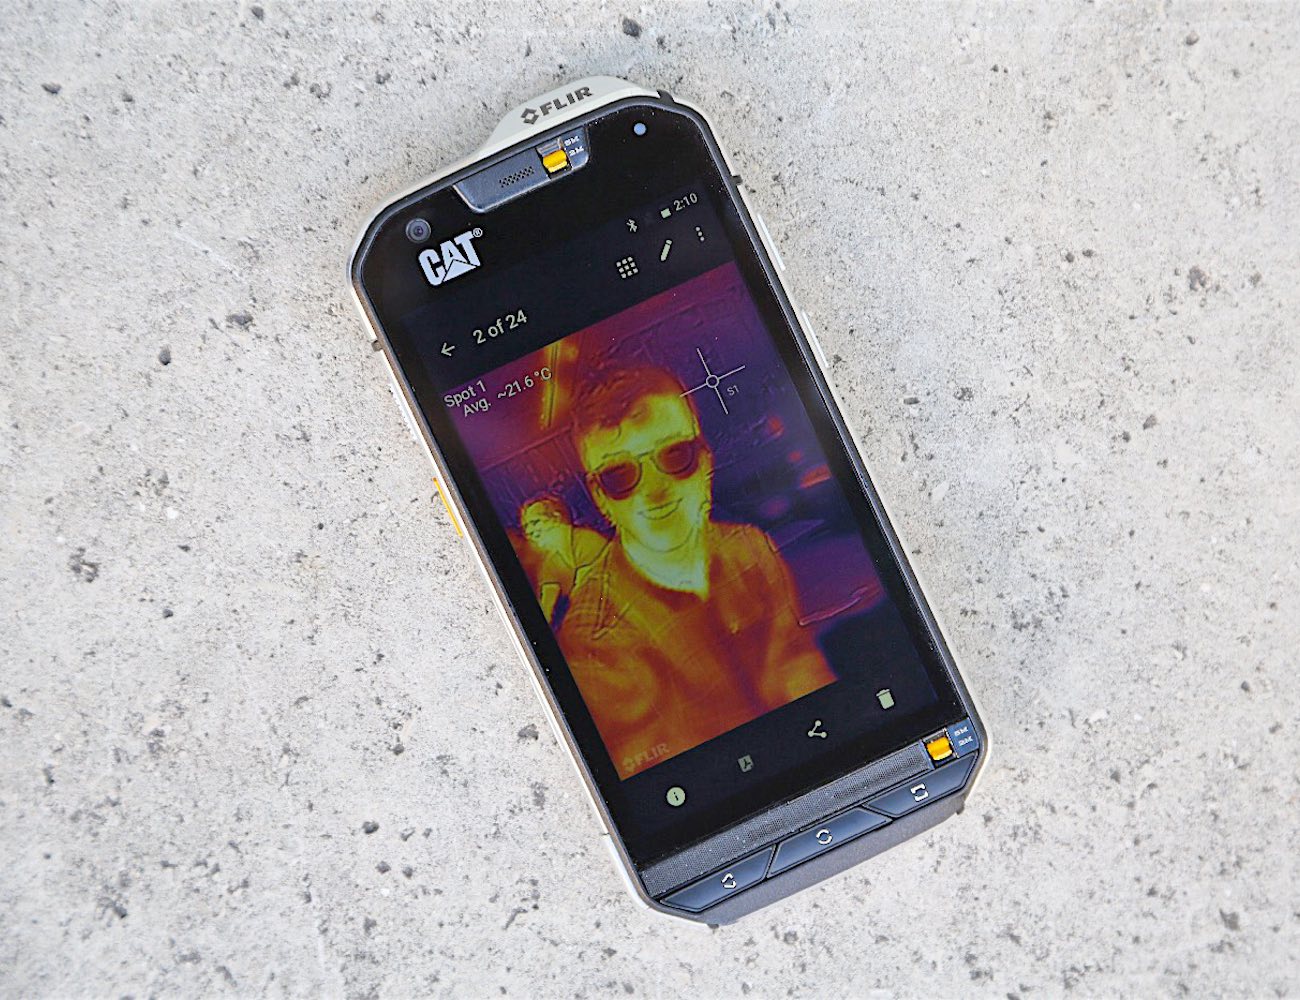 Cat S60 – Unique Smartphone With Integrated Thermal Camera